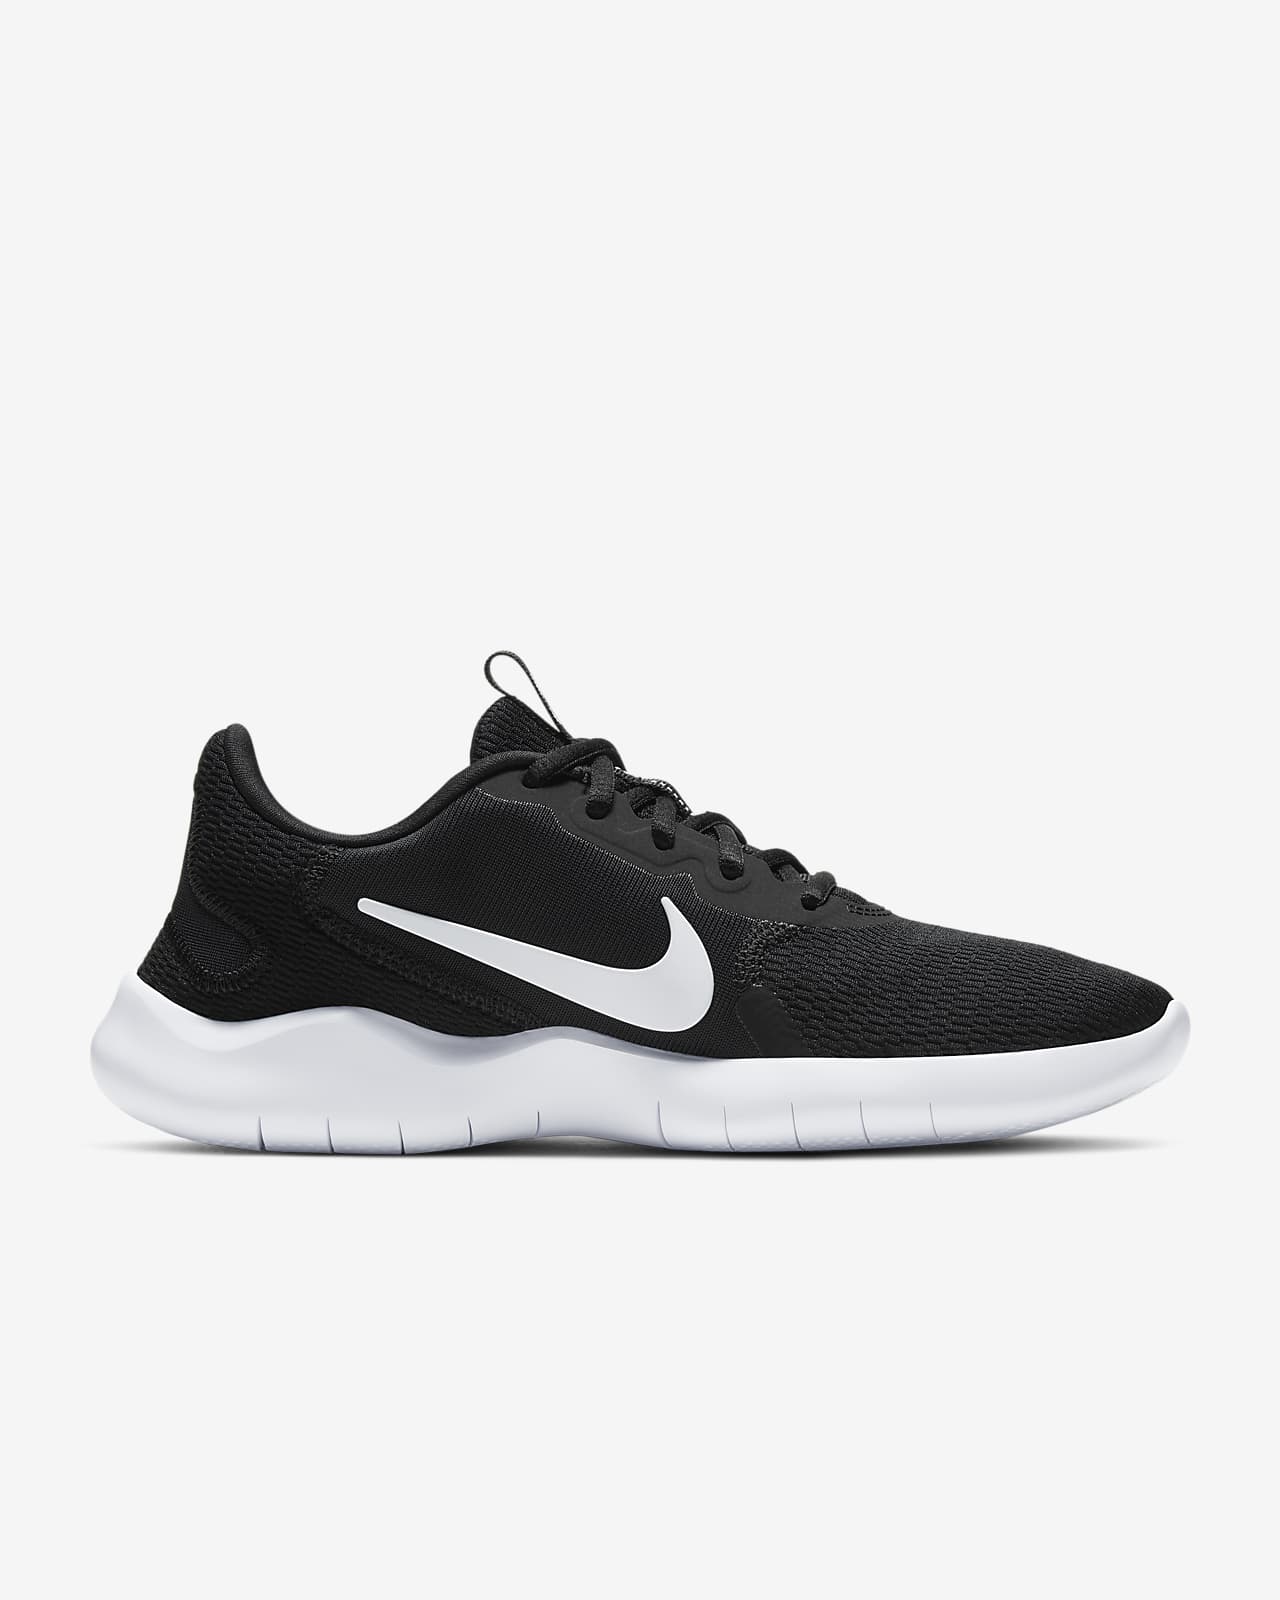 nike flex experience womens running shoes